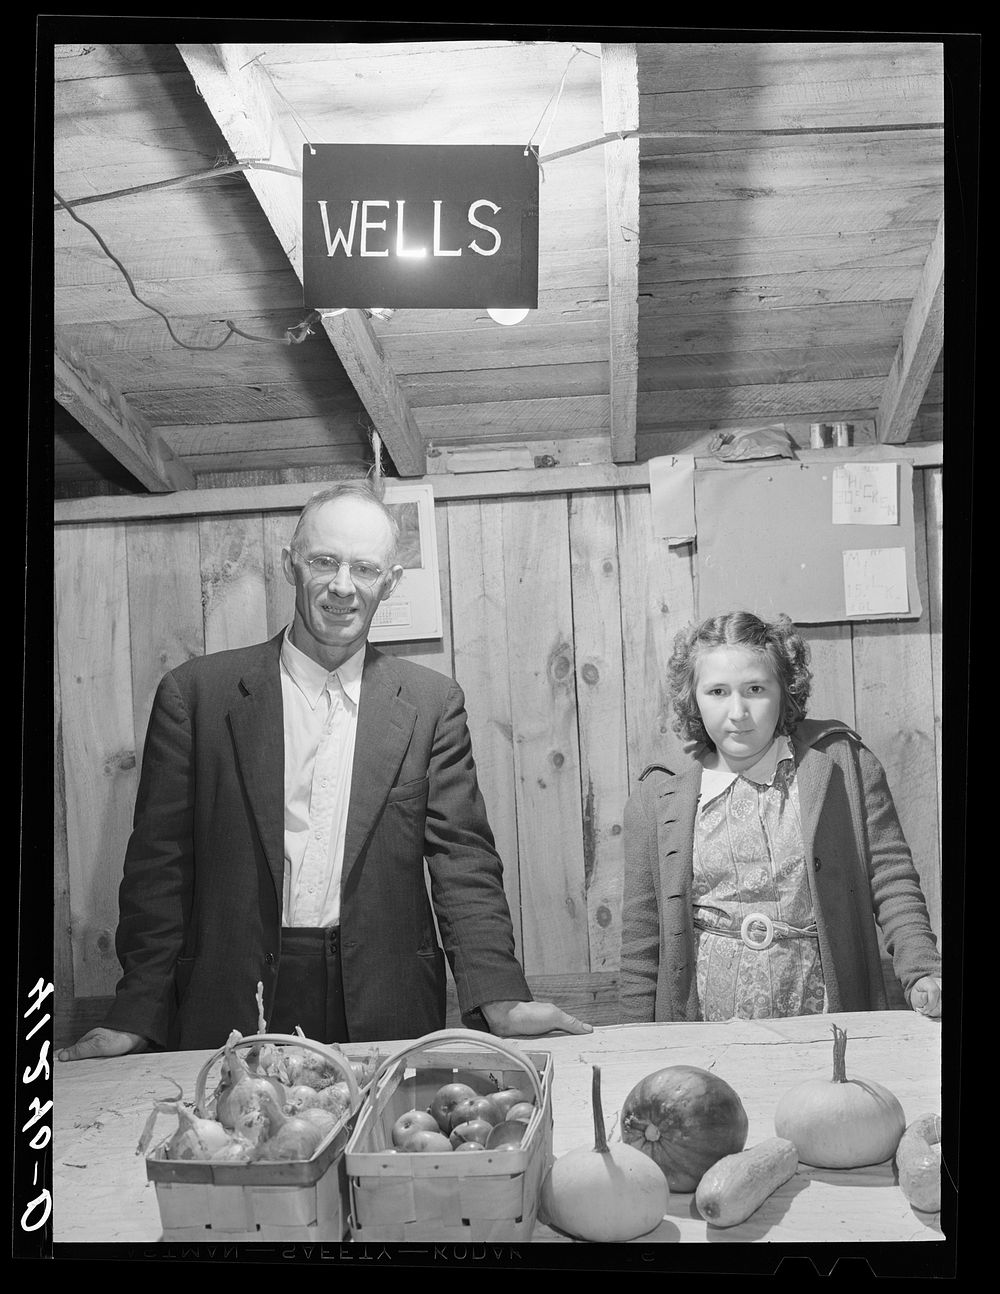 Mr. Wells, members of board of Directors of Tri-County Farmers Co-op Market at Du Bois, Pennsylvania, and his daughter at…